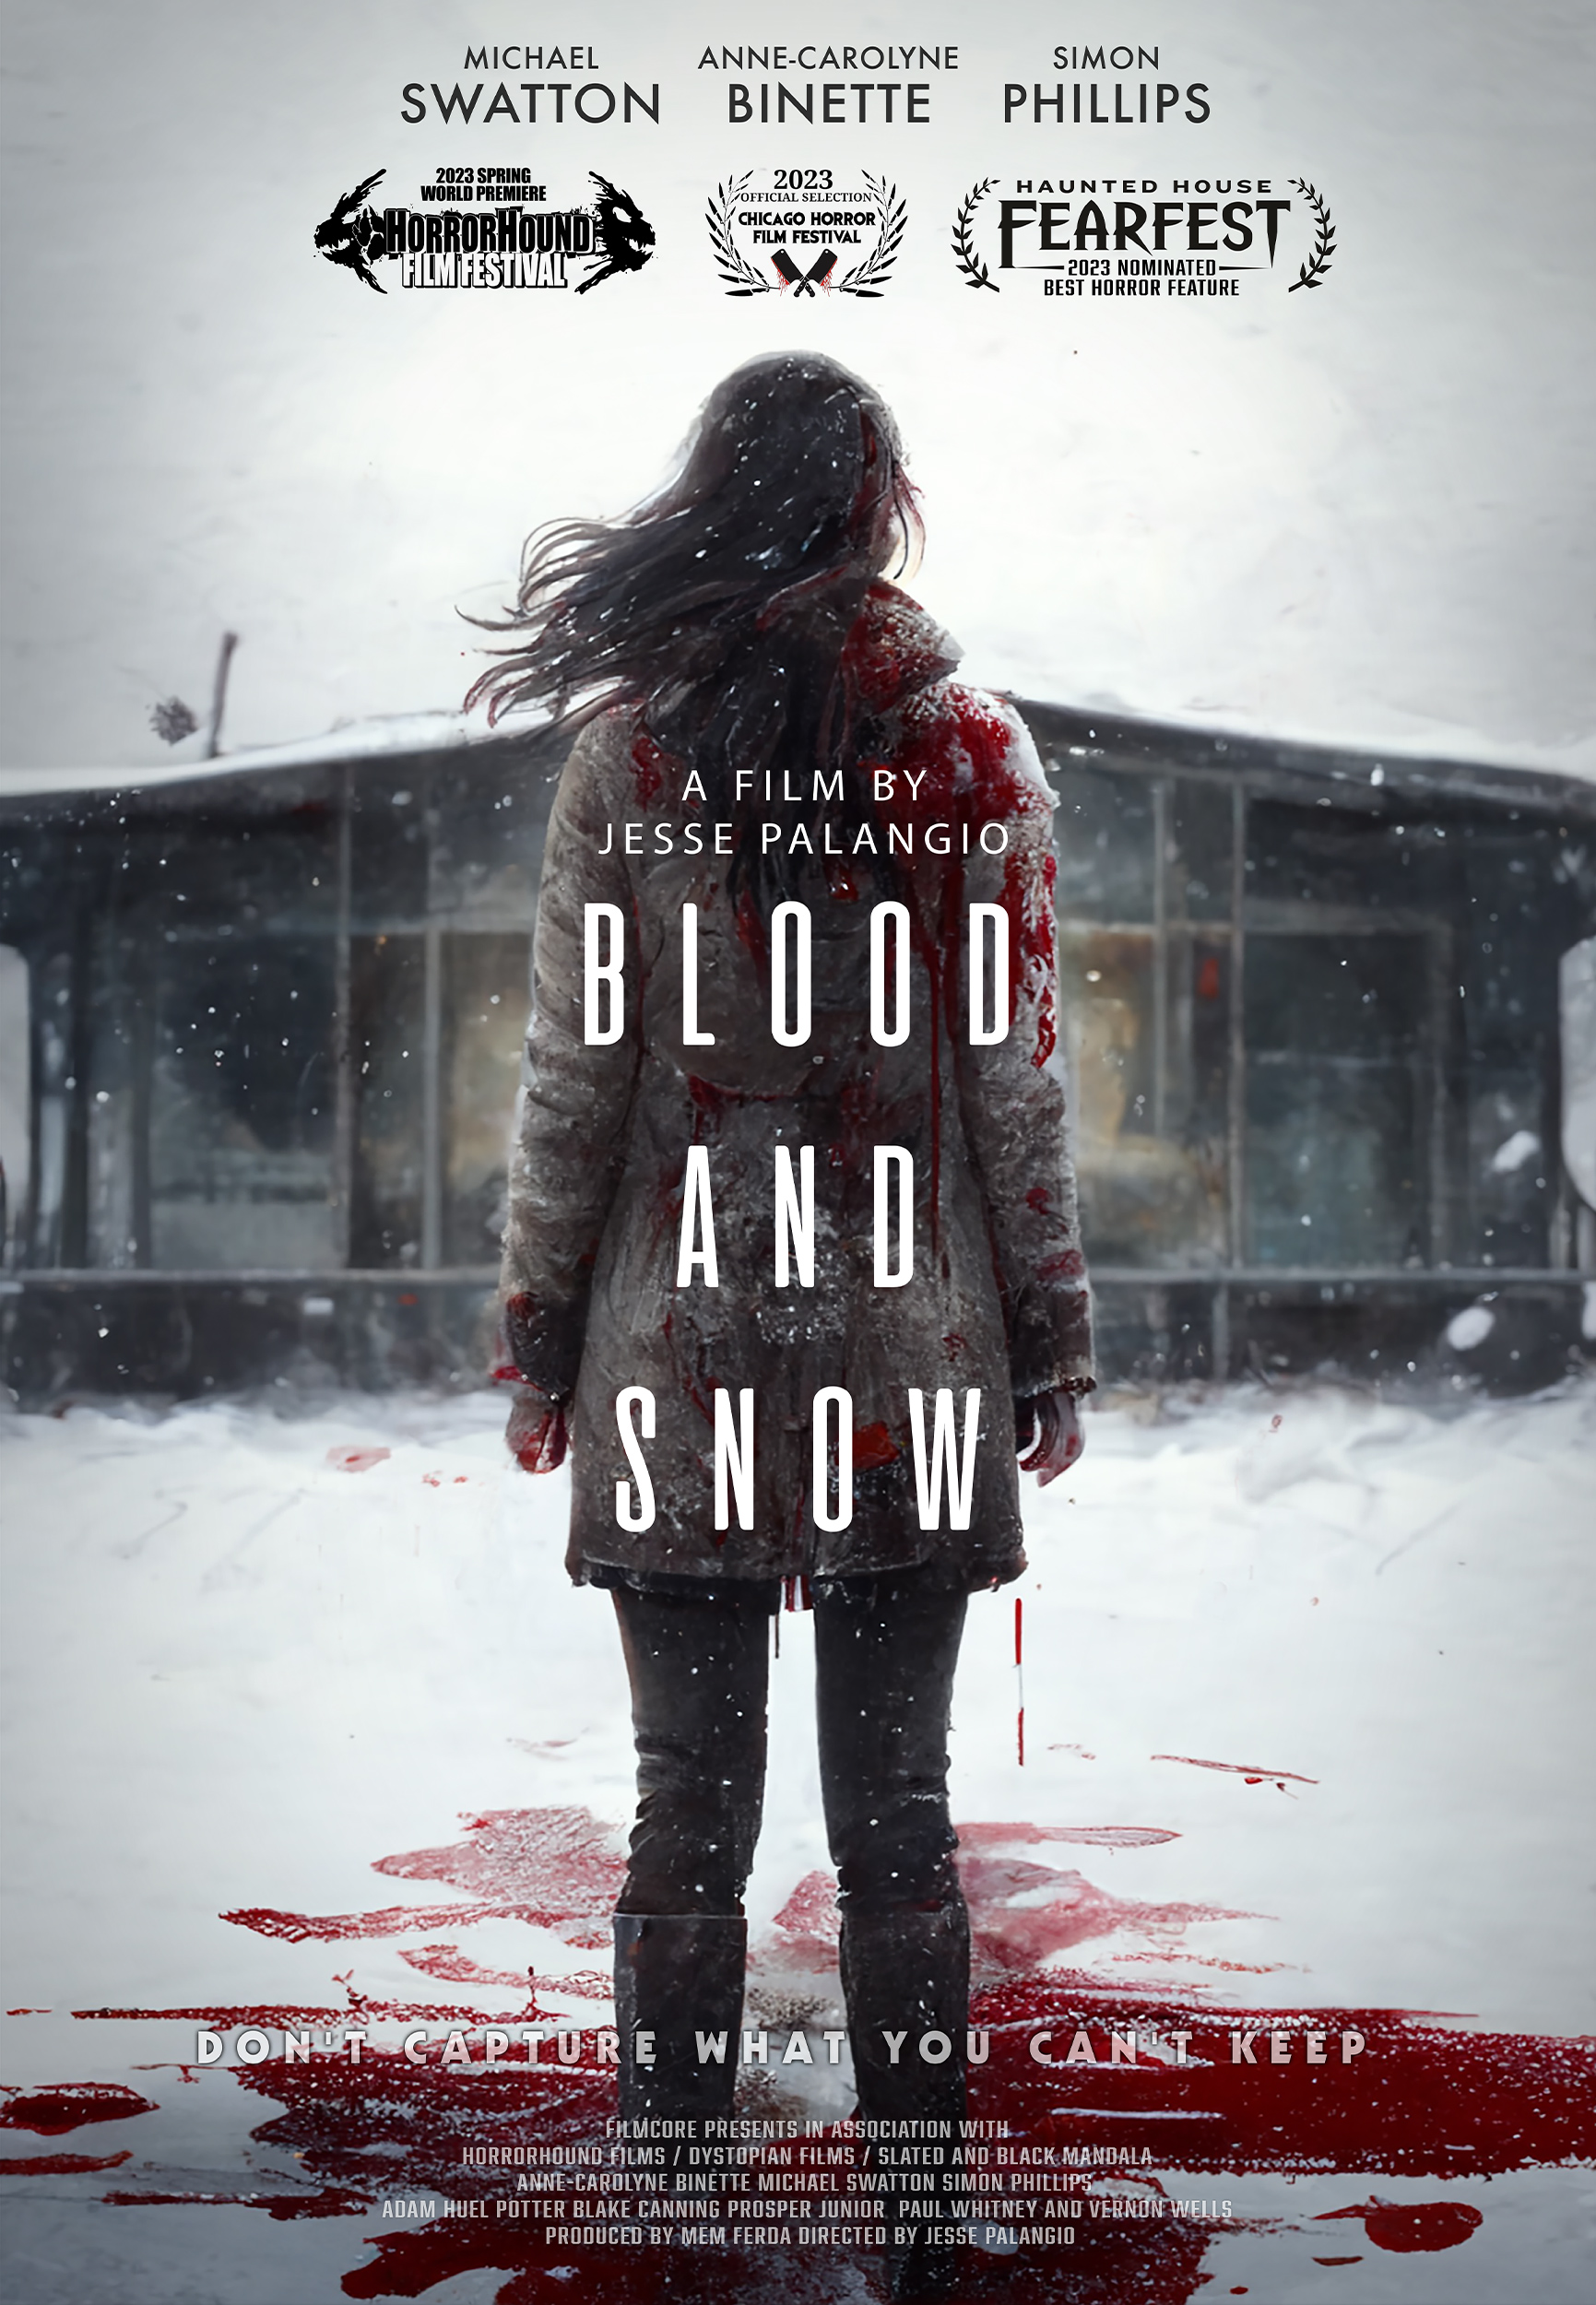 BLOOD AND SNOW